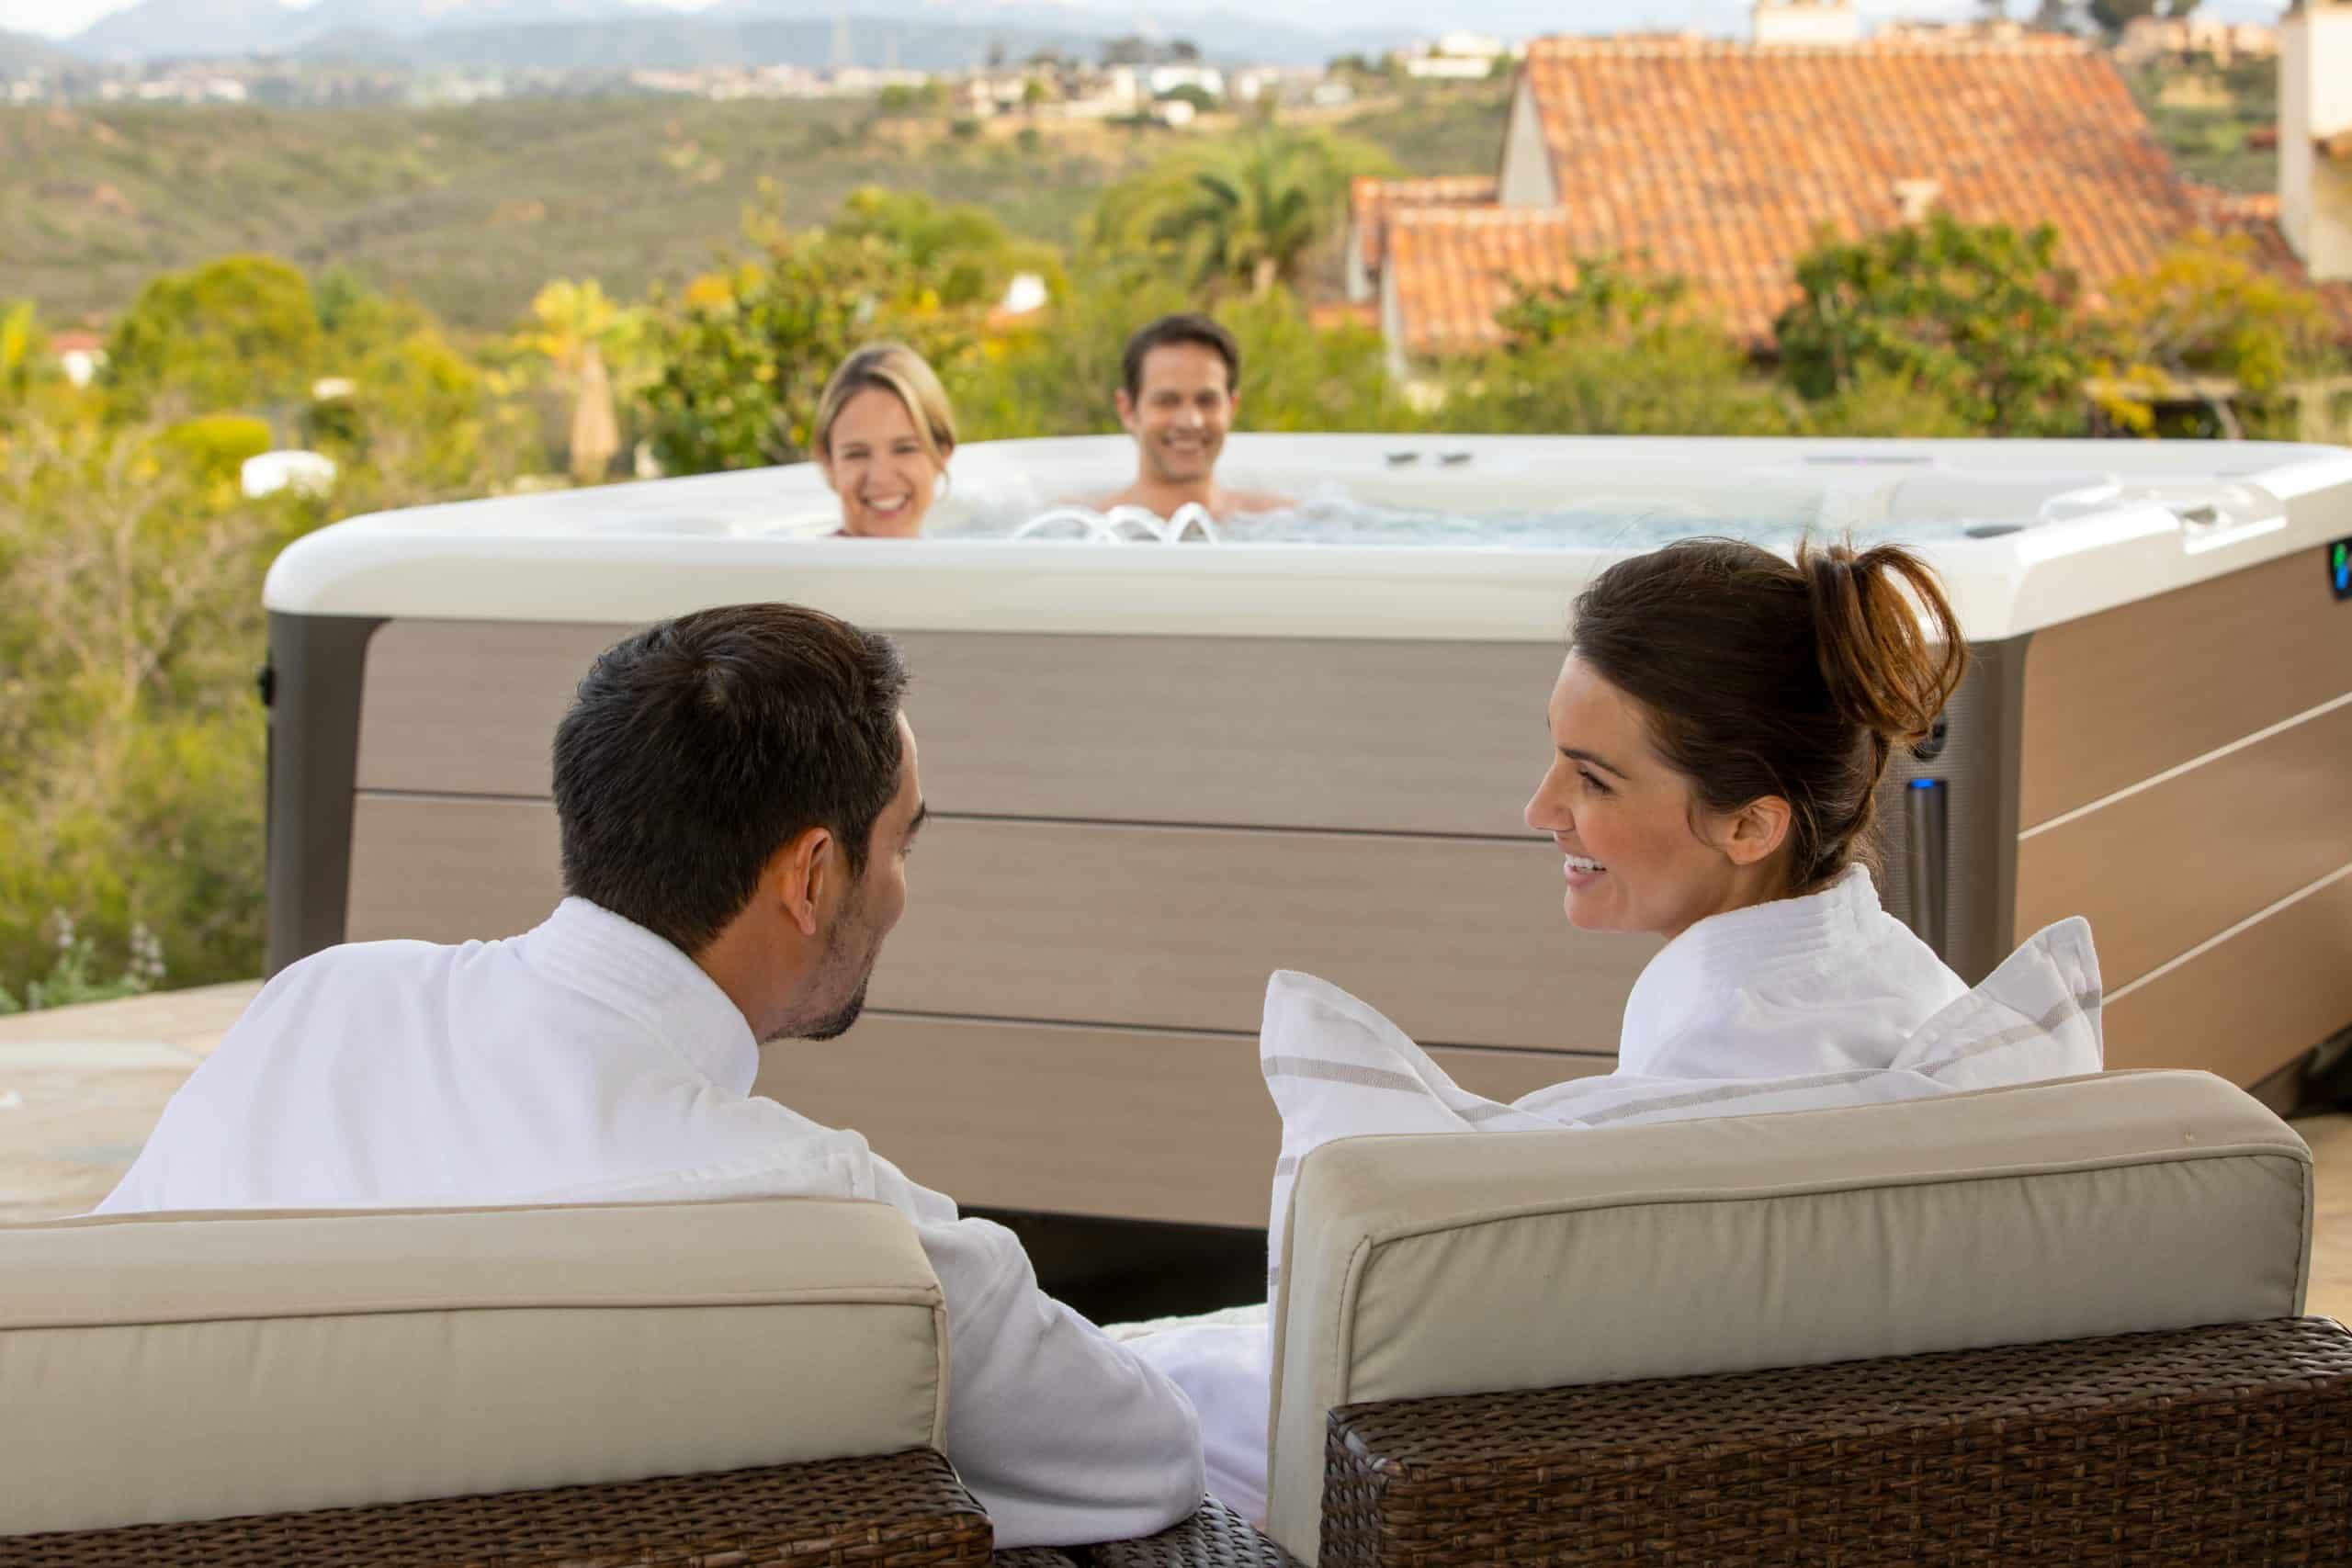 Couple enjoys hot tub while friends look on in fluffy robes